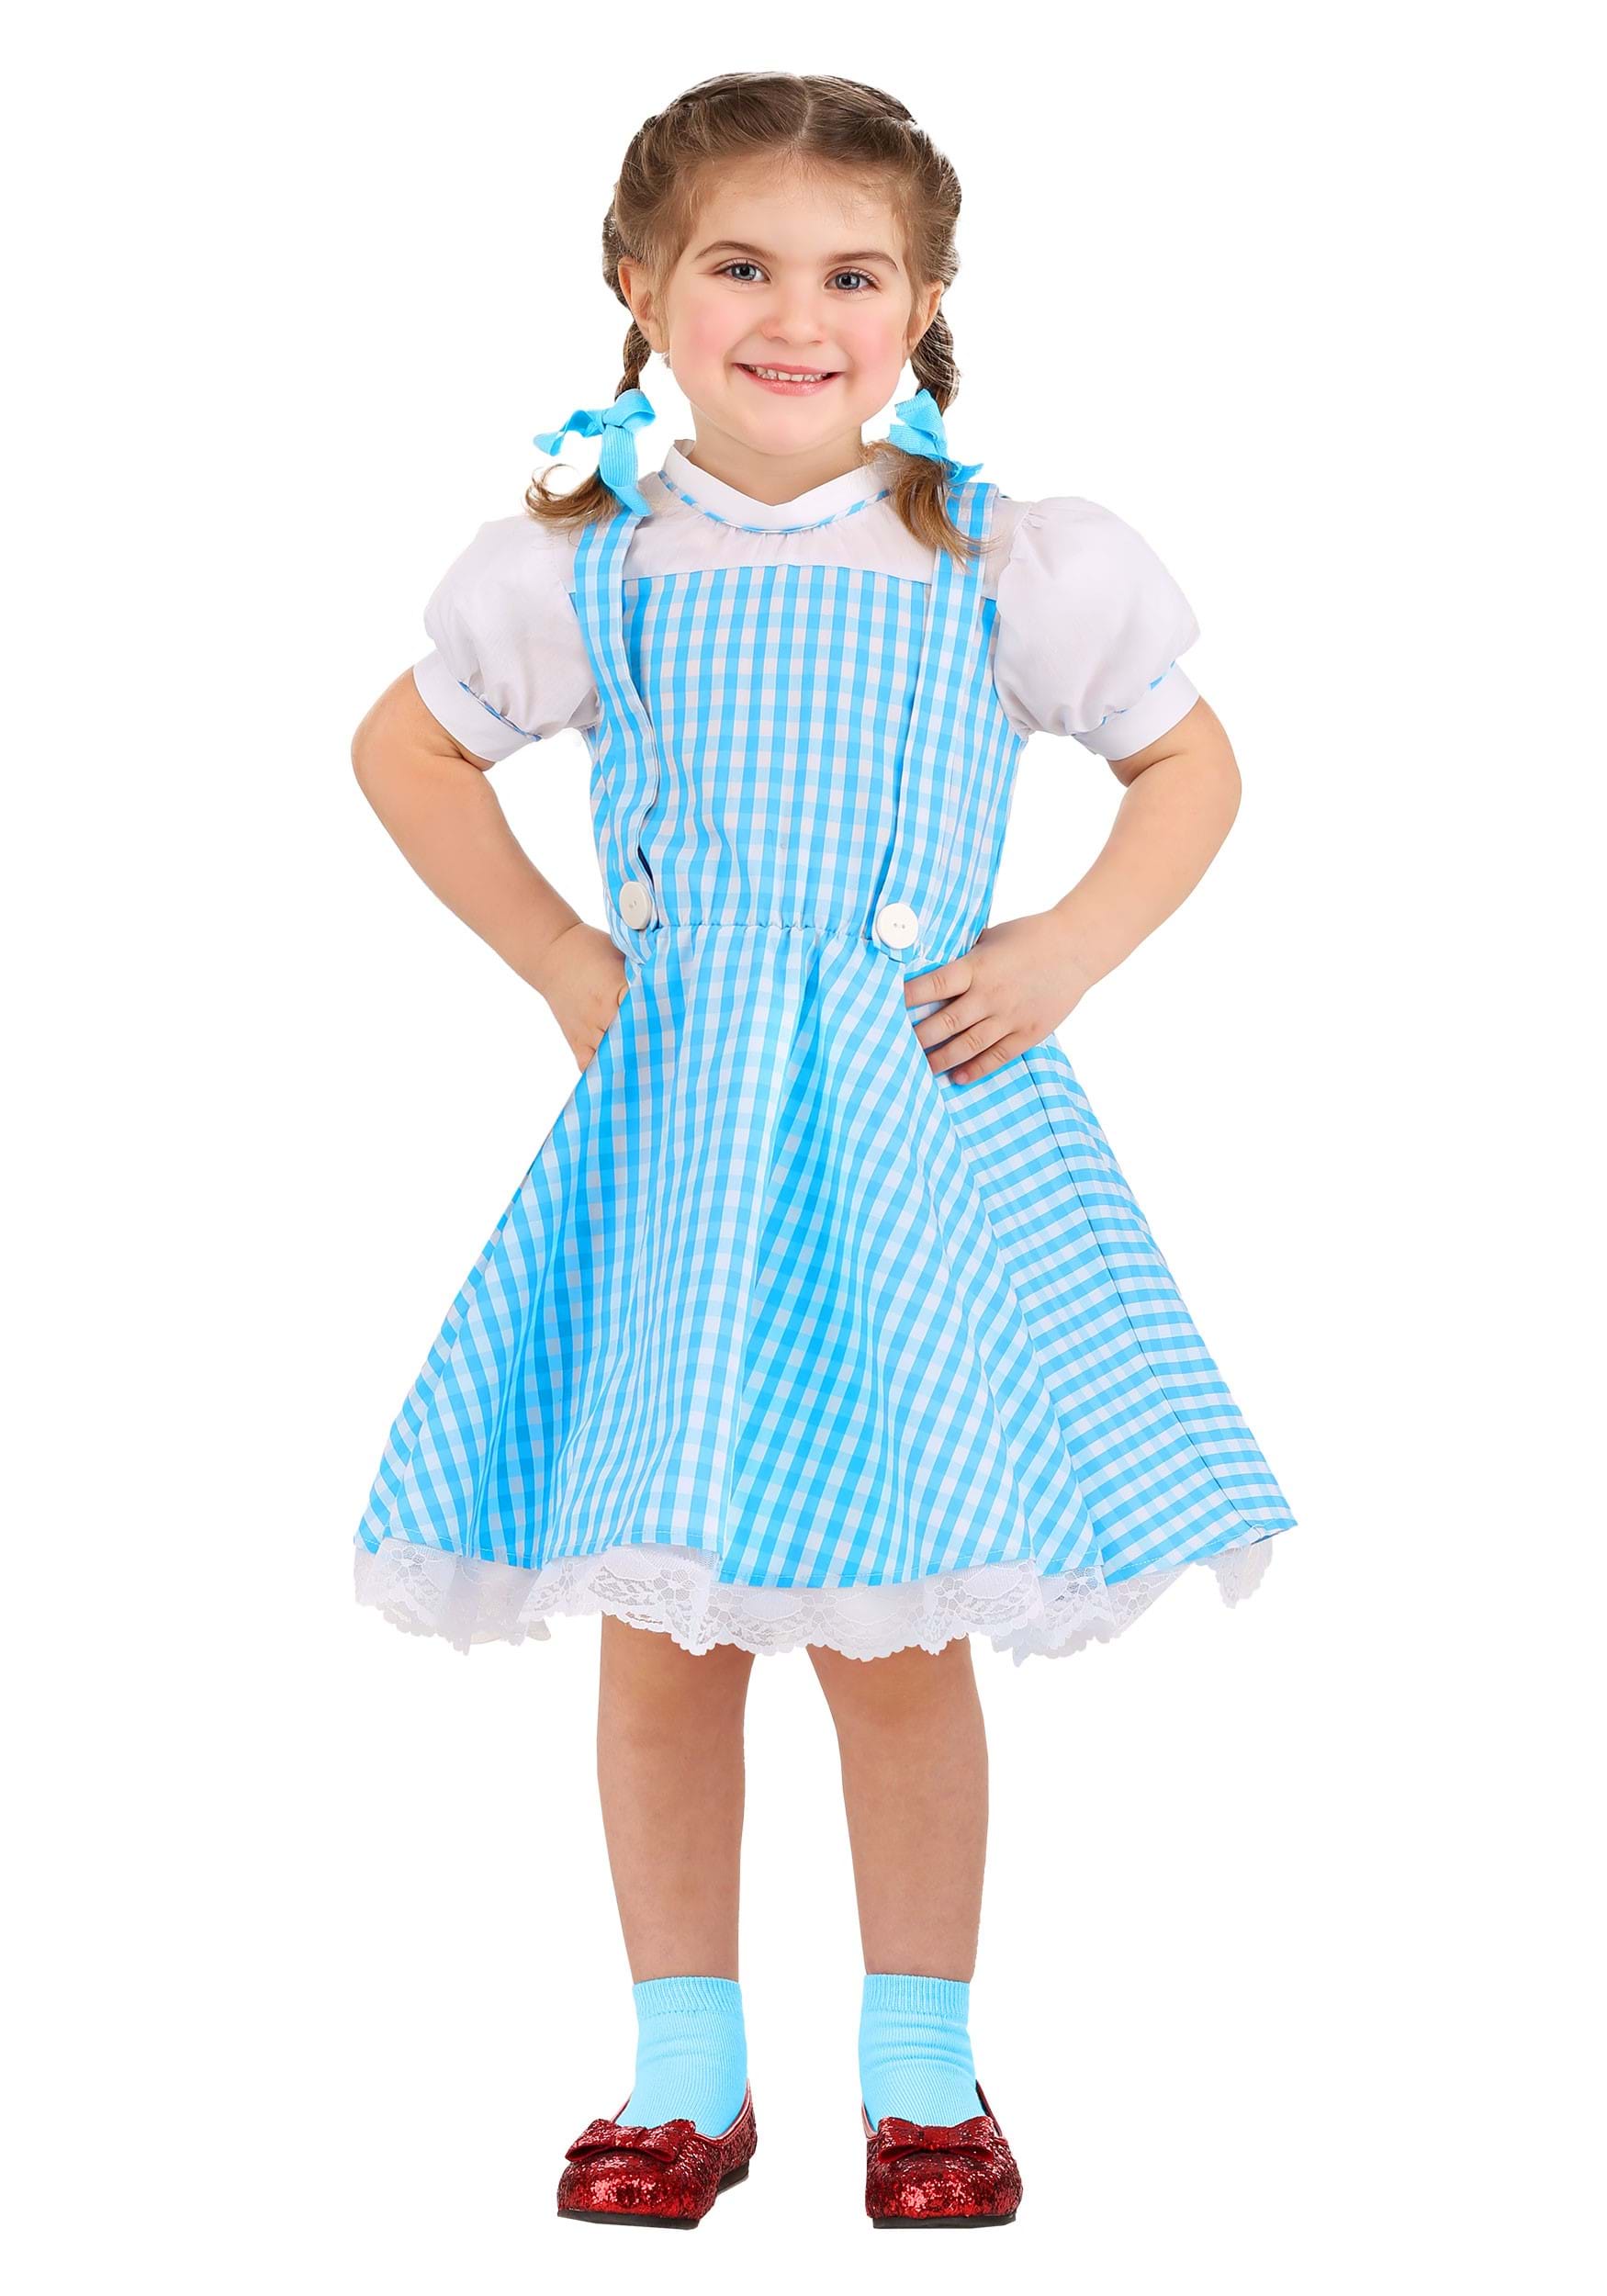 Photos - Fancy Dress Classic FUN Costumes  Dorothy Wizard of Oz Toddler Costume | Dorothy Costum 